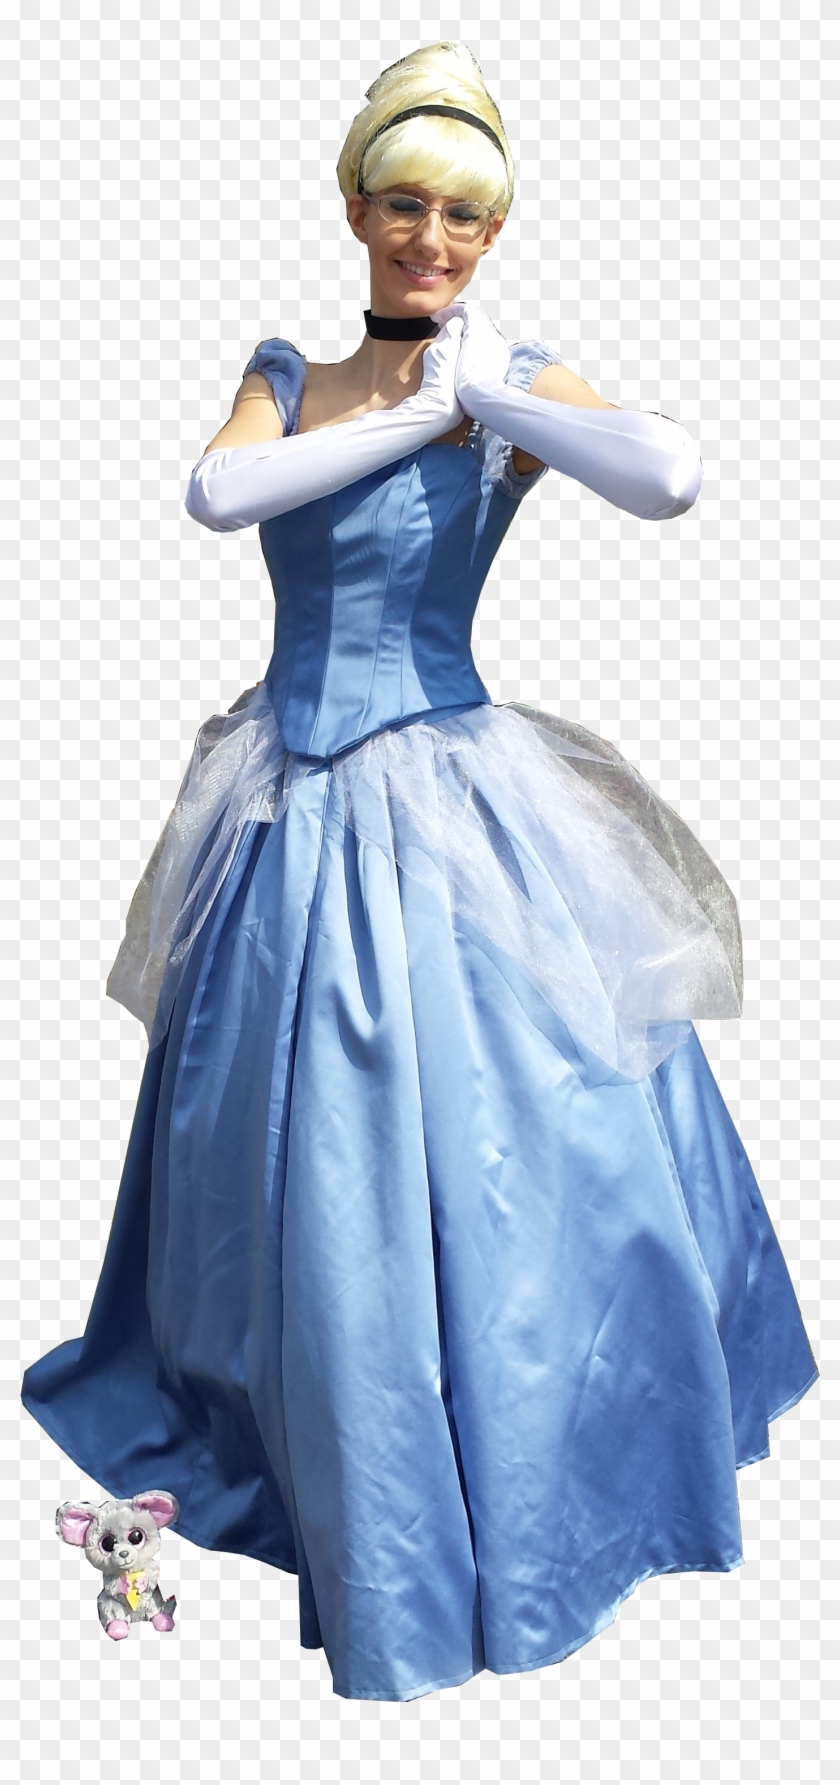 2017 Time Travel Costumes Cinderella Gown Dress Costume - Costume #284345